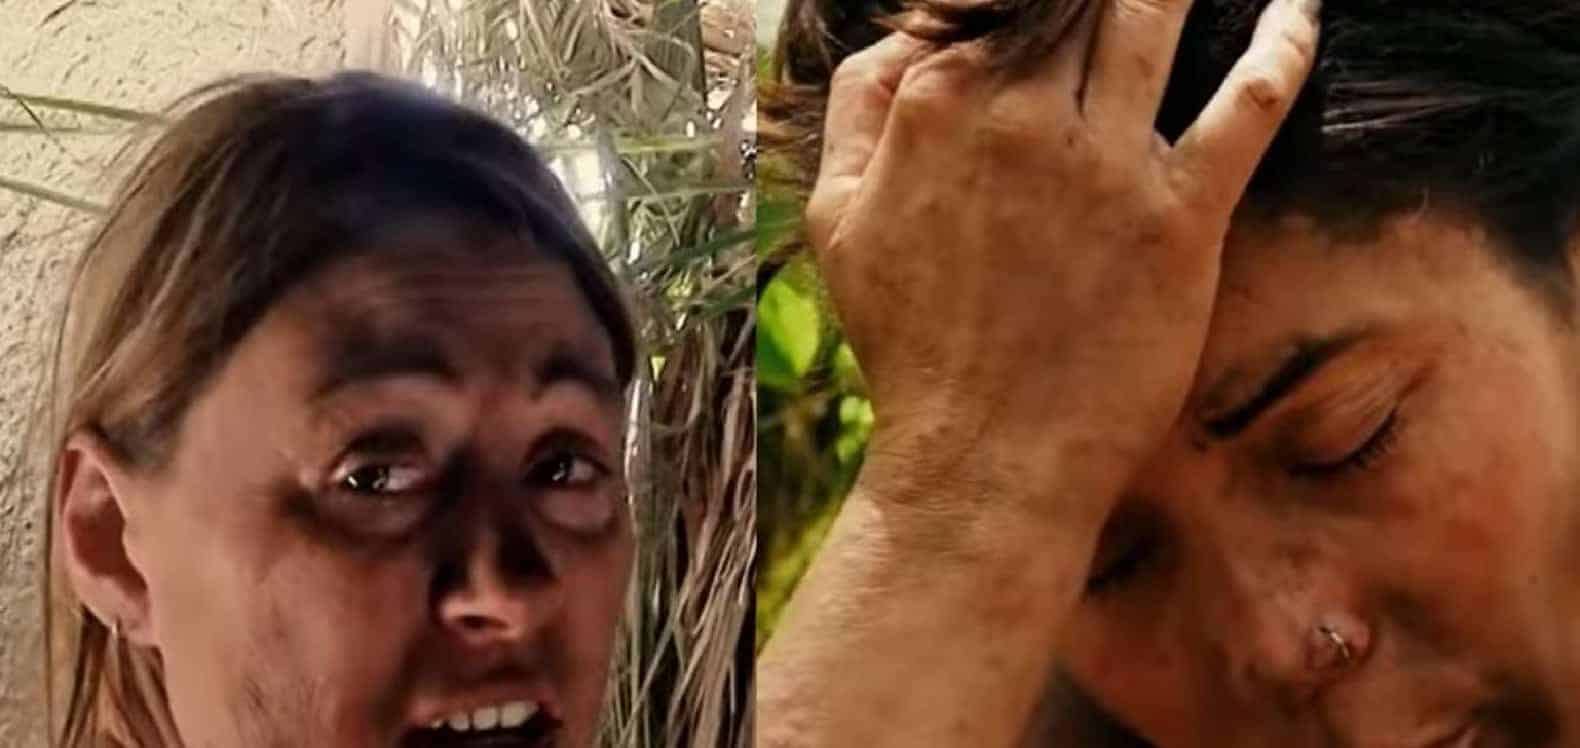 Naked And Afraid Season 15 Episode 7 Release Date